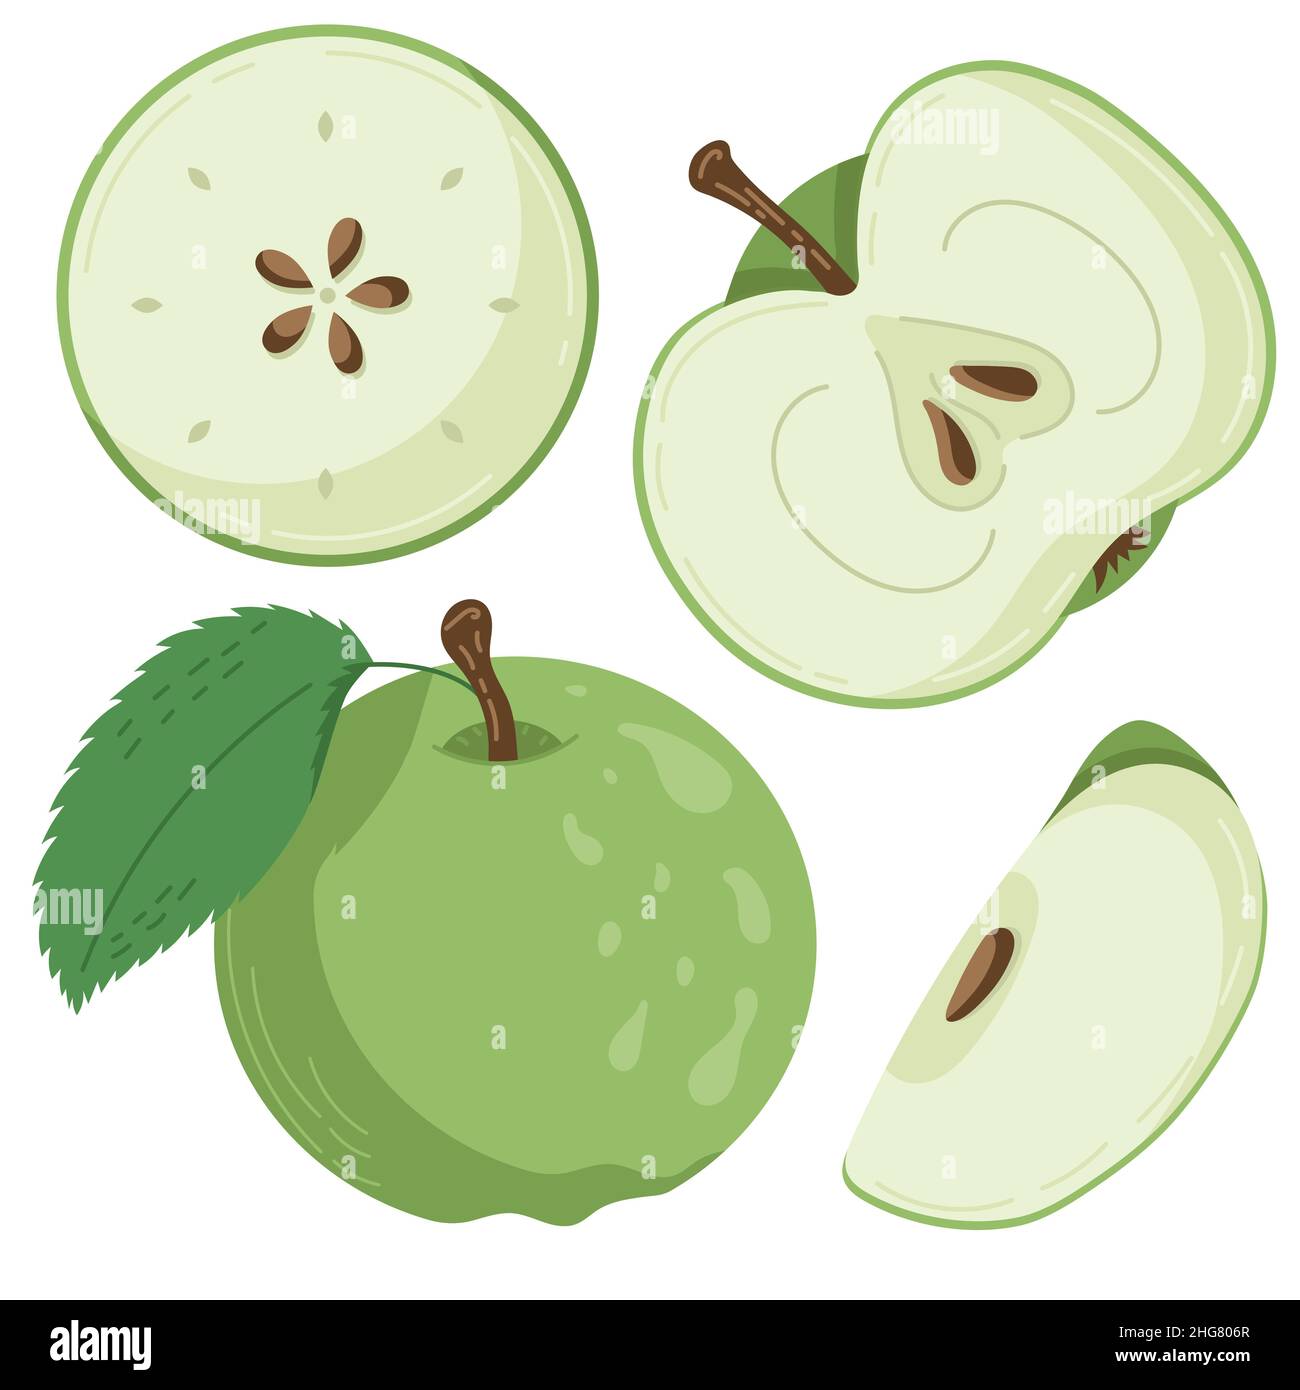 A set of apple fruit drawn in a flat style, slices and halves of fruit, leaves and bones. A set of stickers in pastel colours Stock Vector